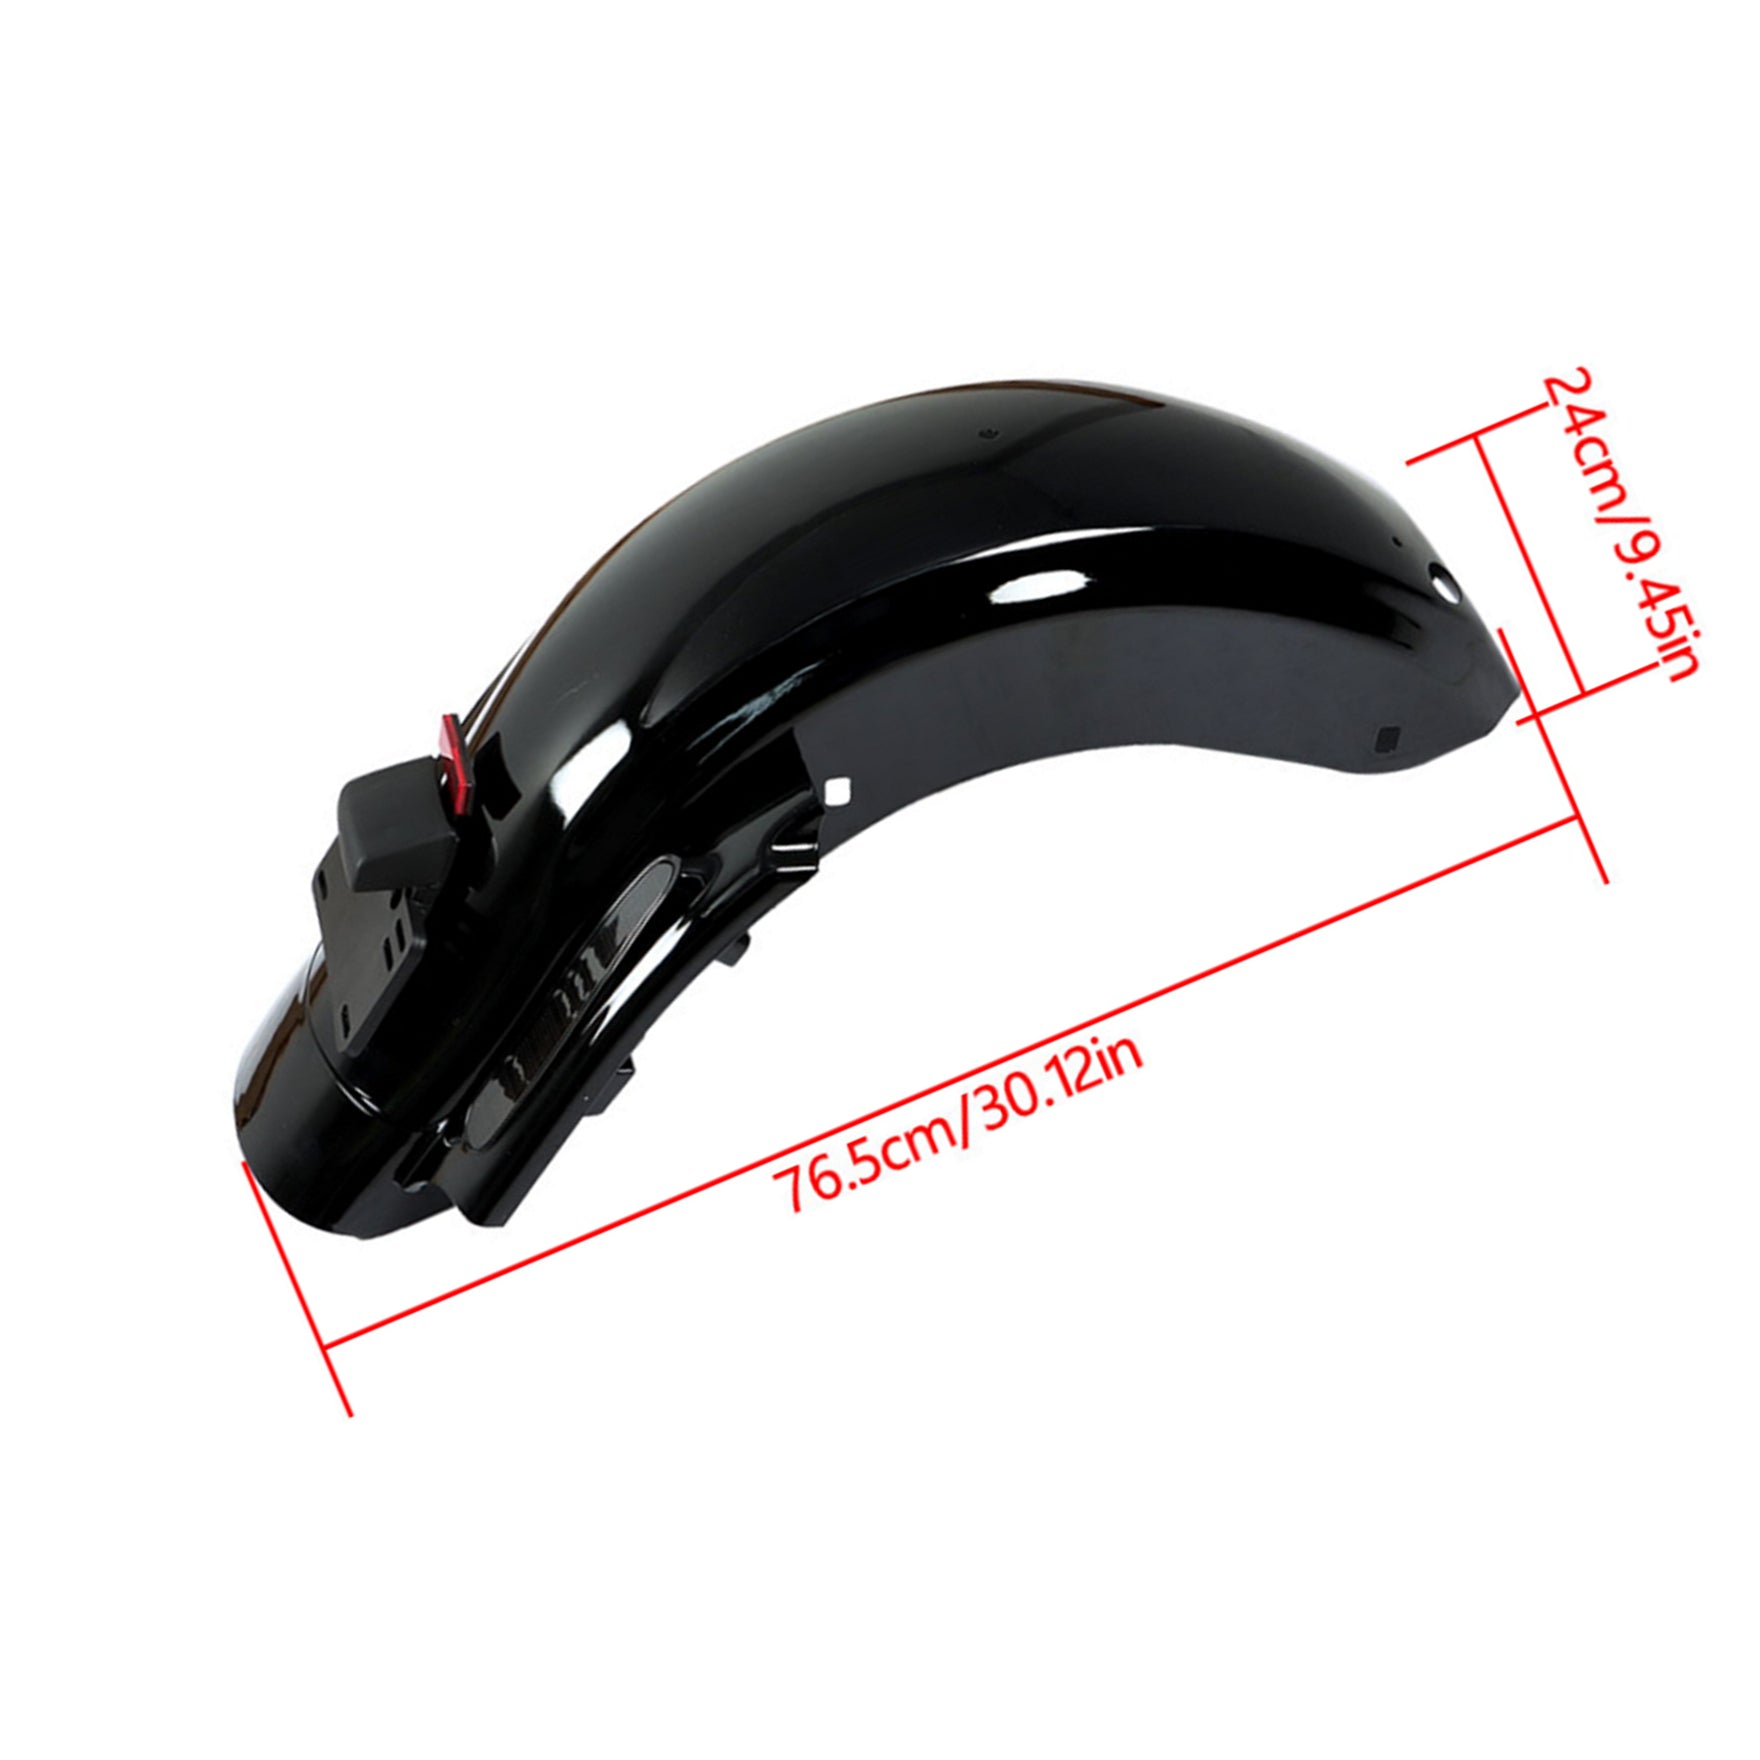 labwork Black Motorcycle Rear Fender System Lights CVO Style Replacement for Touring Electra Glide Road Glide Road King Street Glide 2009-2013